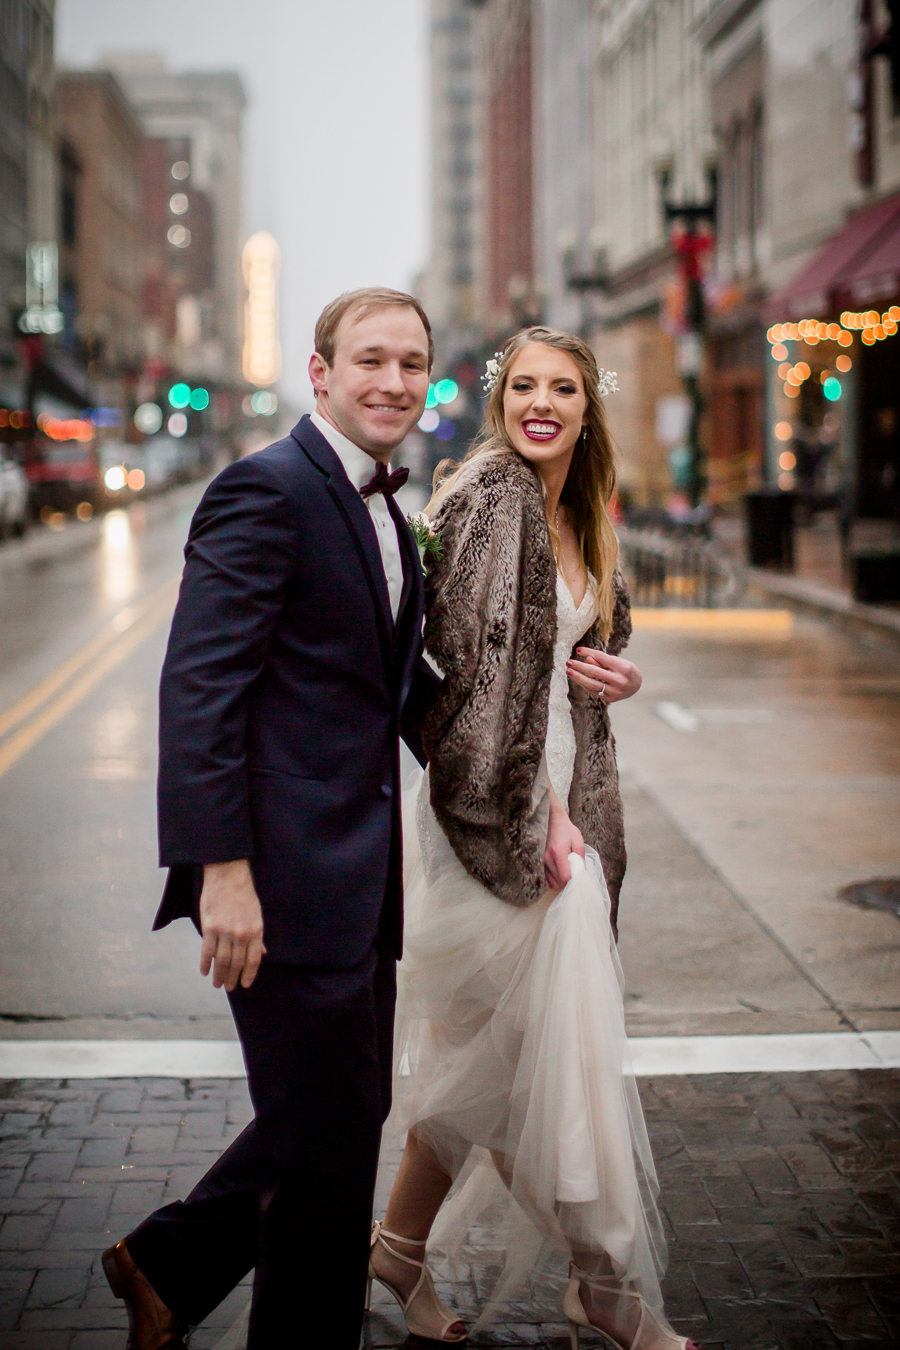 Laughing together in the middle of the street during the bride and groom romantic portraits at this winter wedding at Knoxville Wedding Venue, Jackson Terminal, by Knoxville Wedding Photographer, Amanda May Photos.